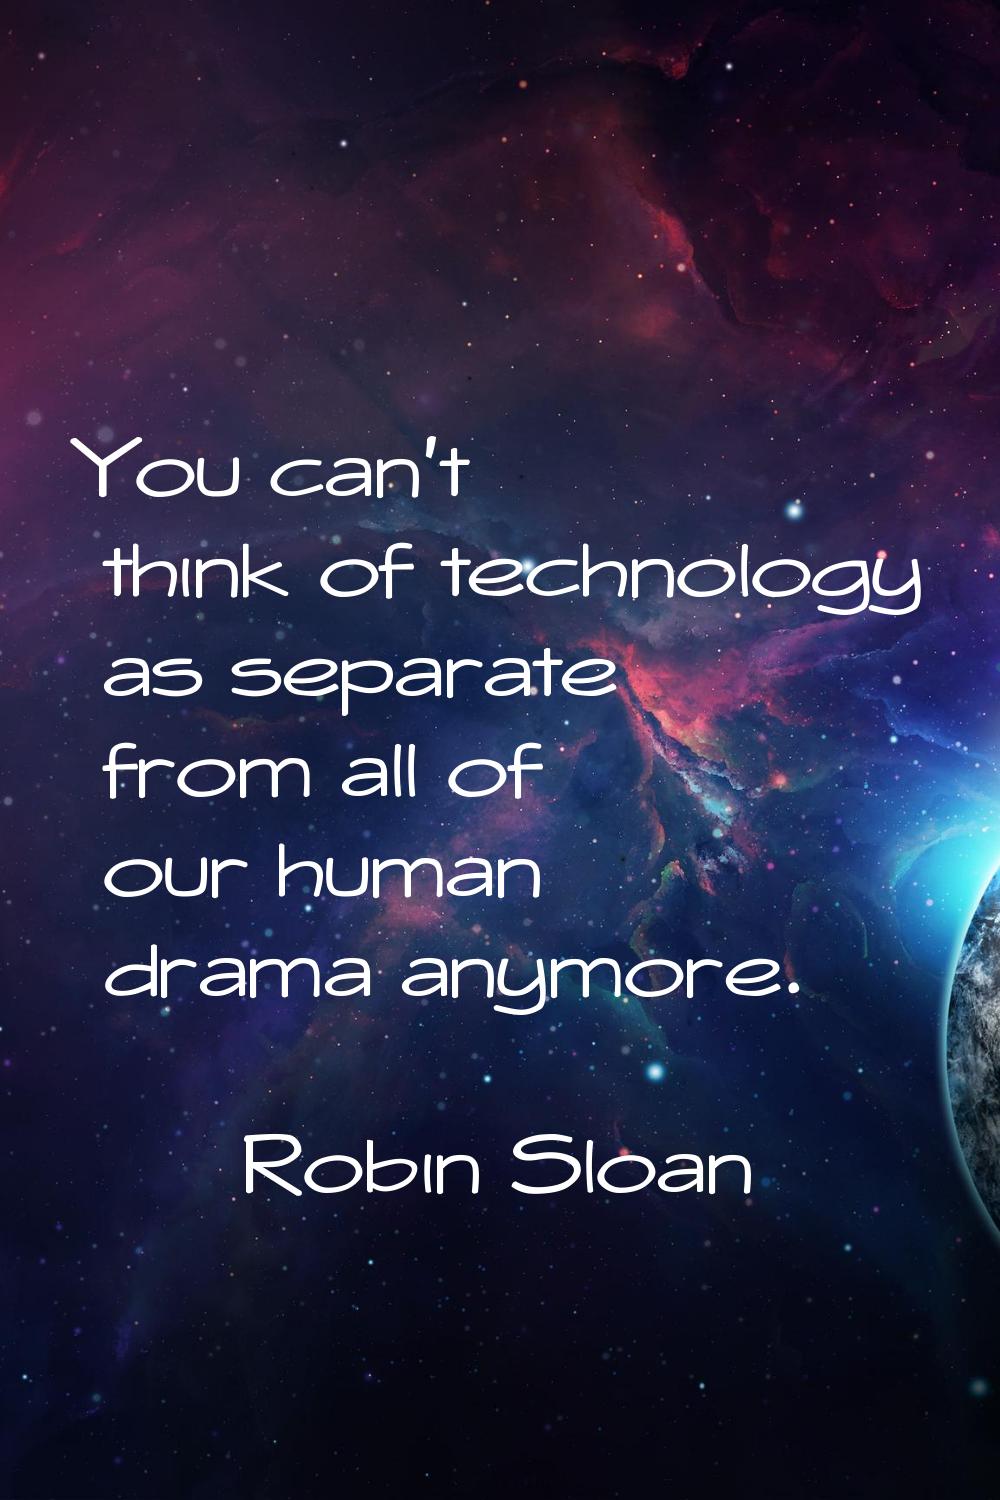 You can't think of technology as separate from all of our human drama anymore.